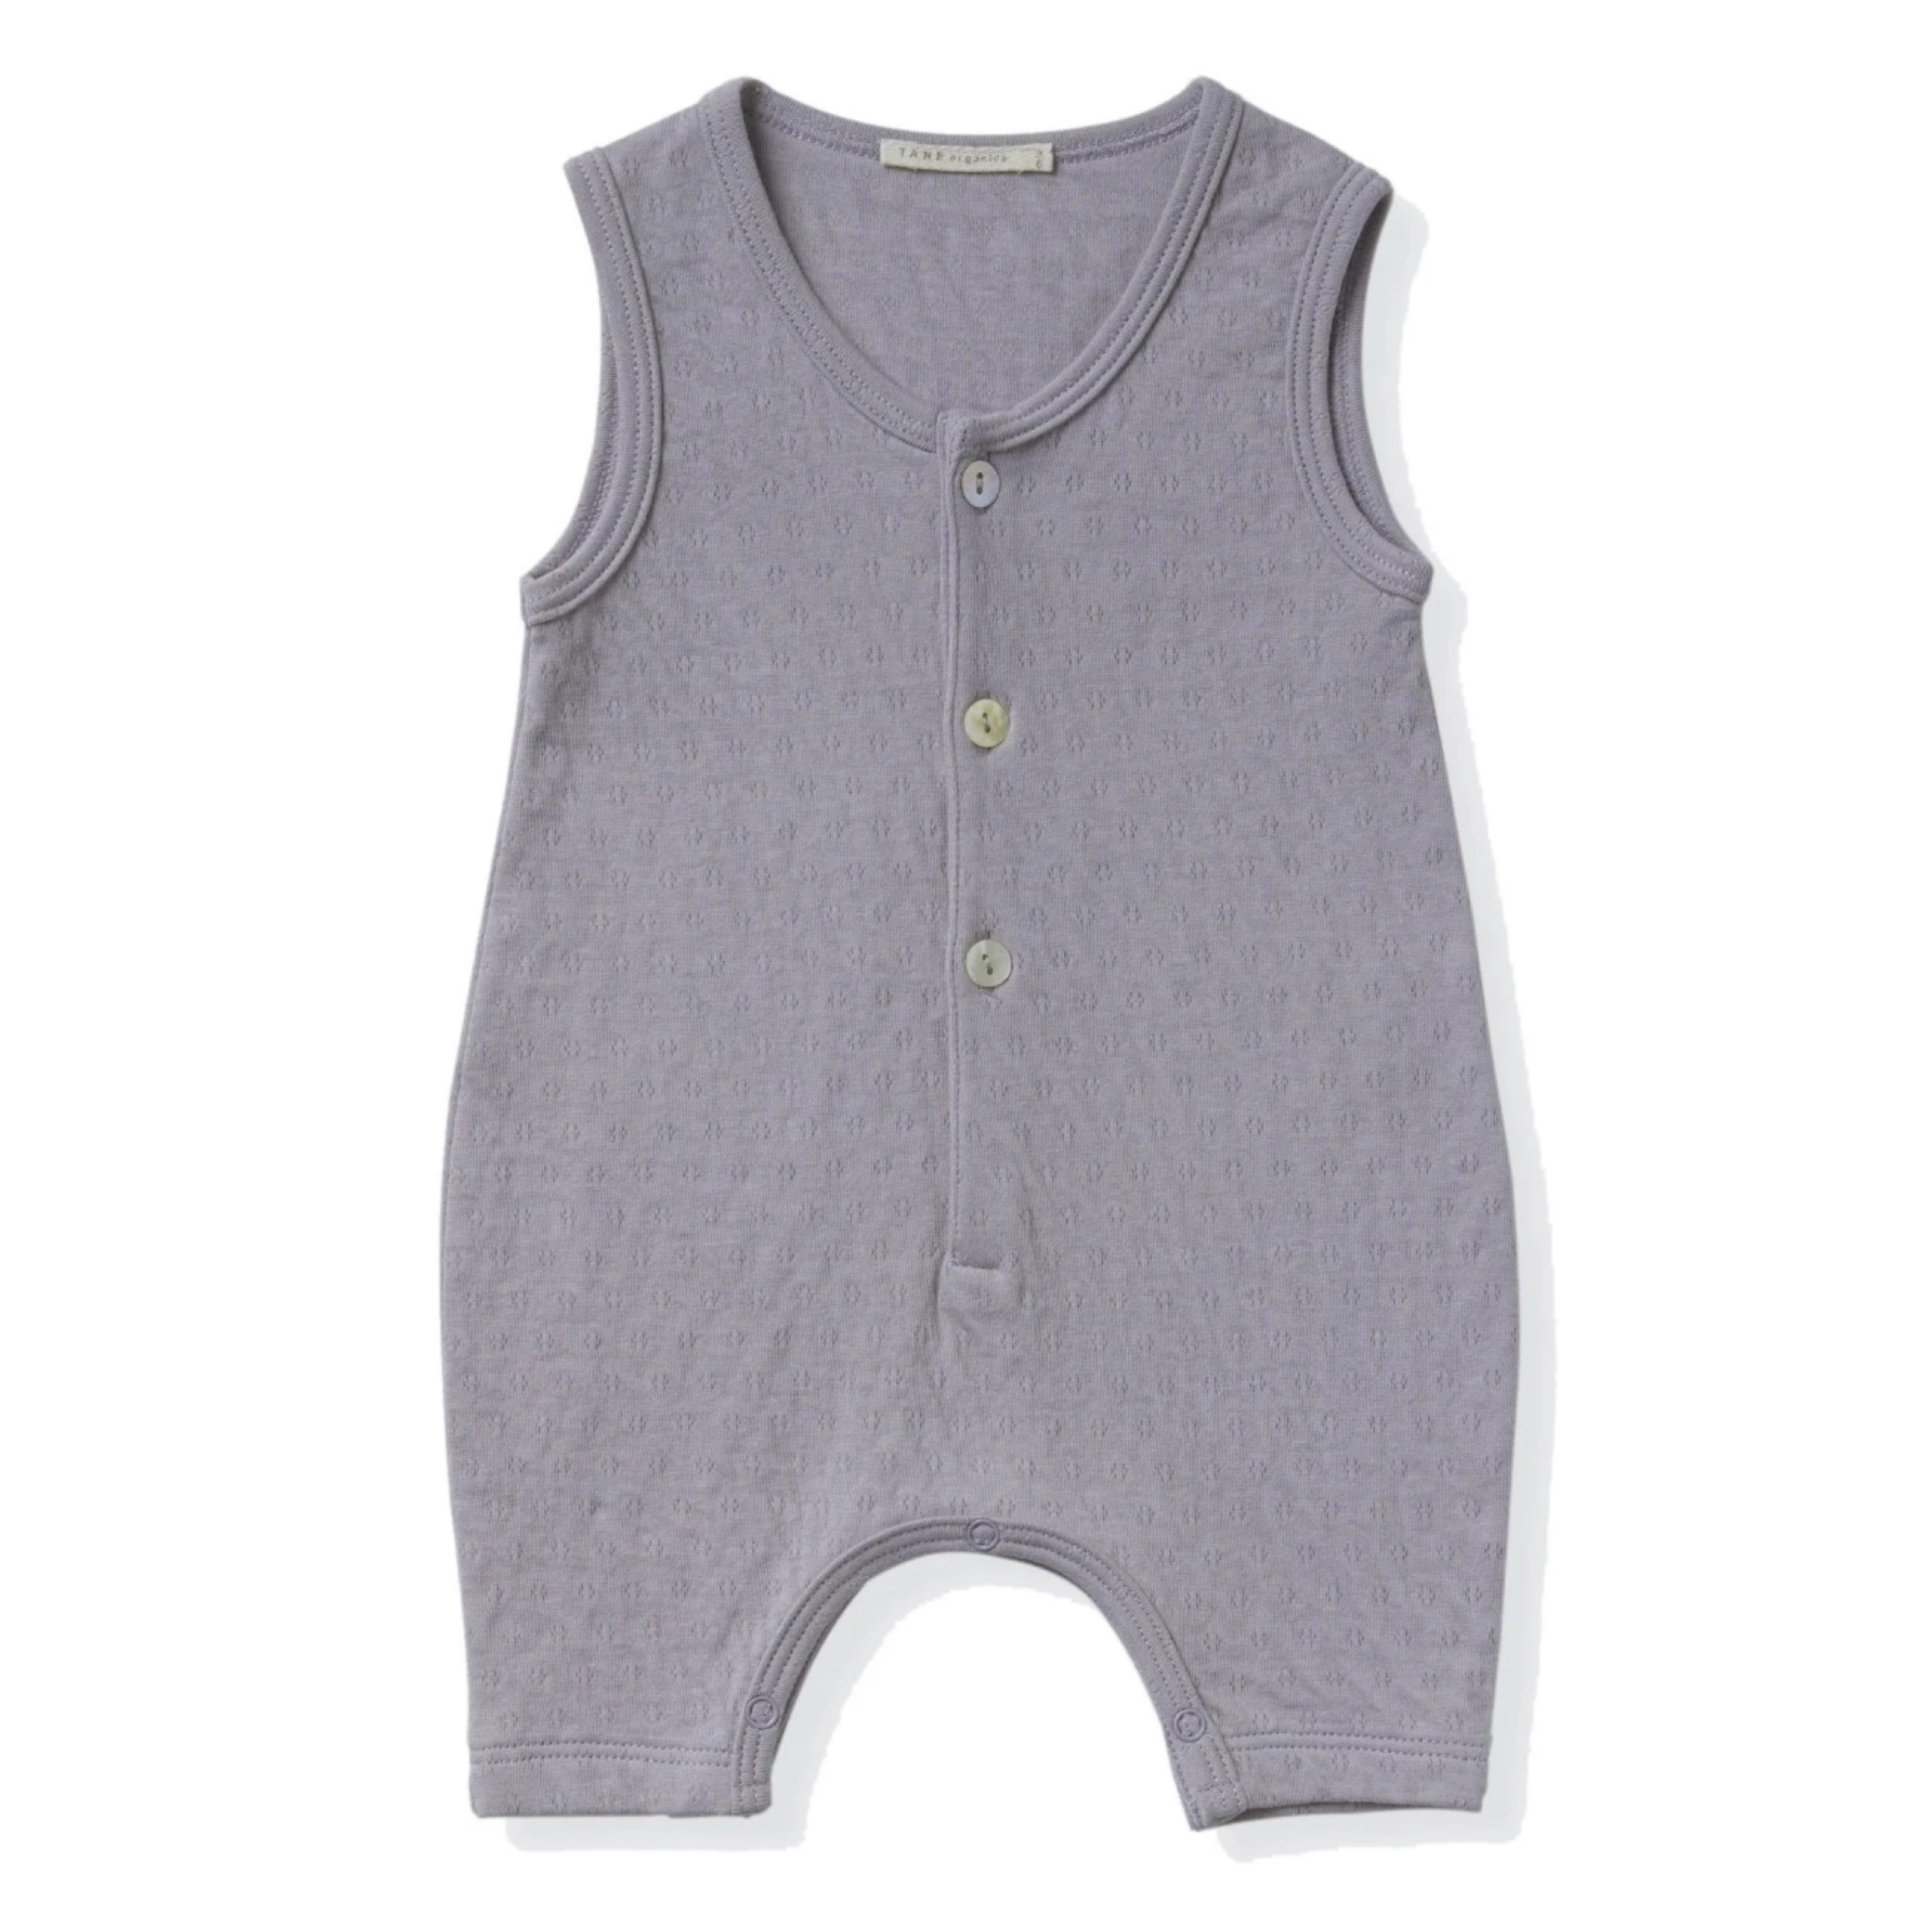 cool grey sleeveless 3 shell buttons henley romper in pointelle ribbed fabric.  100% organic cottton.